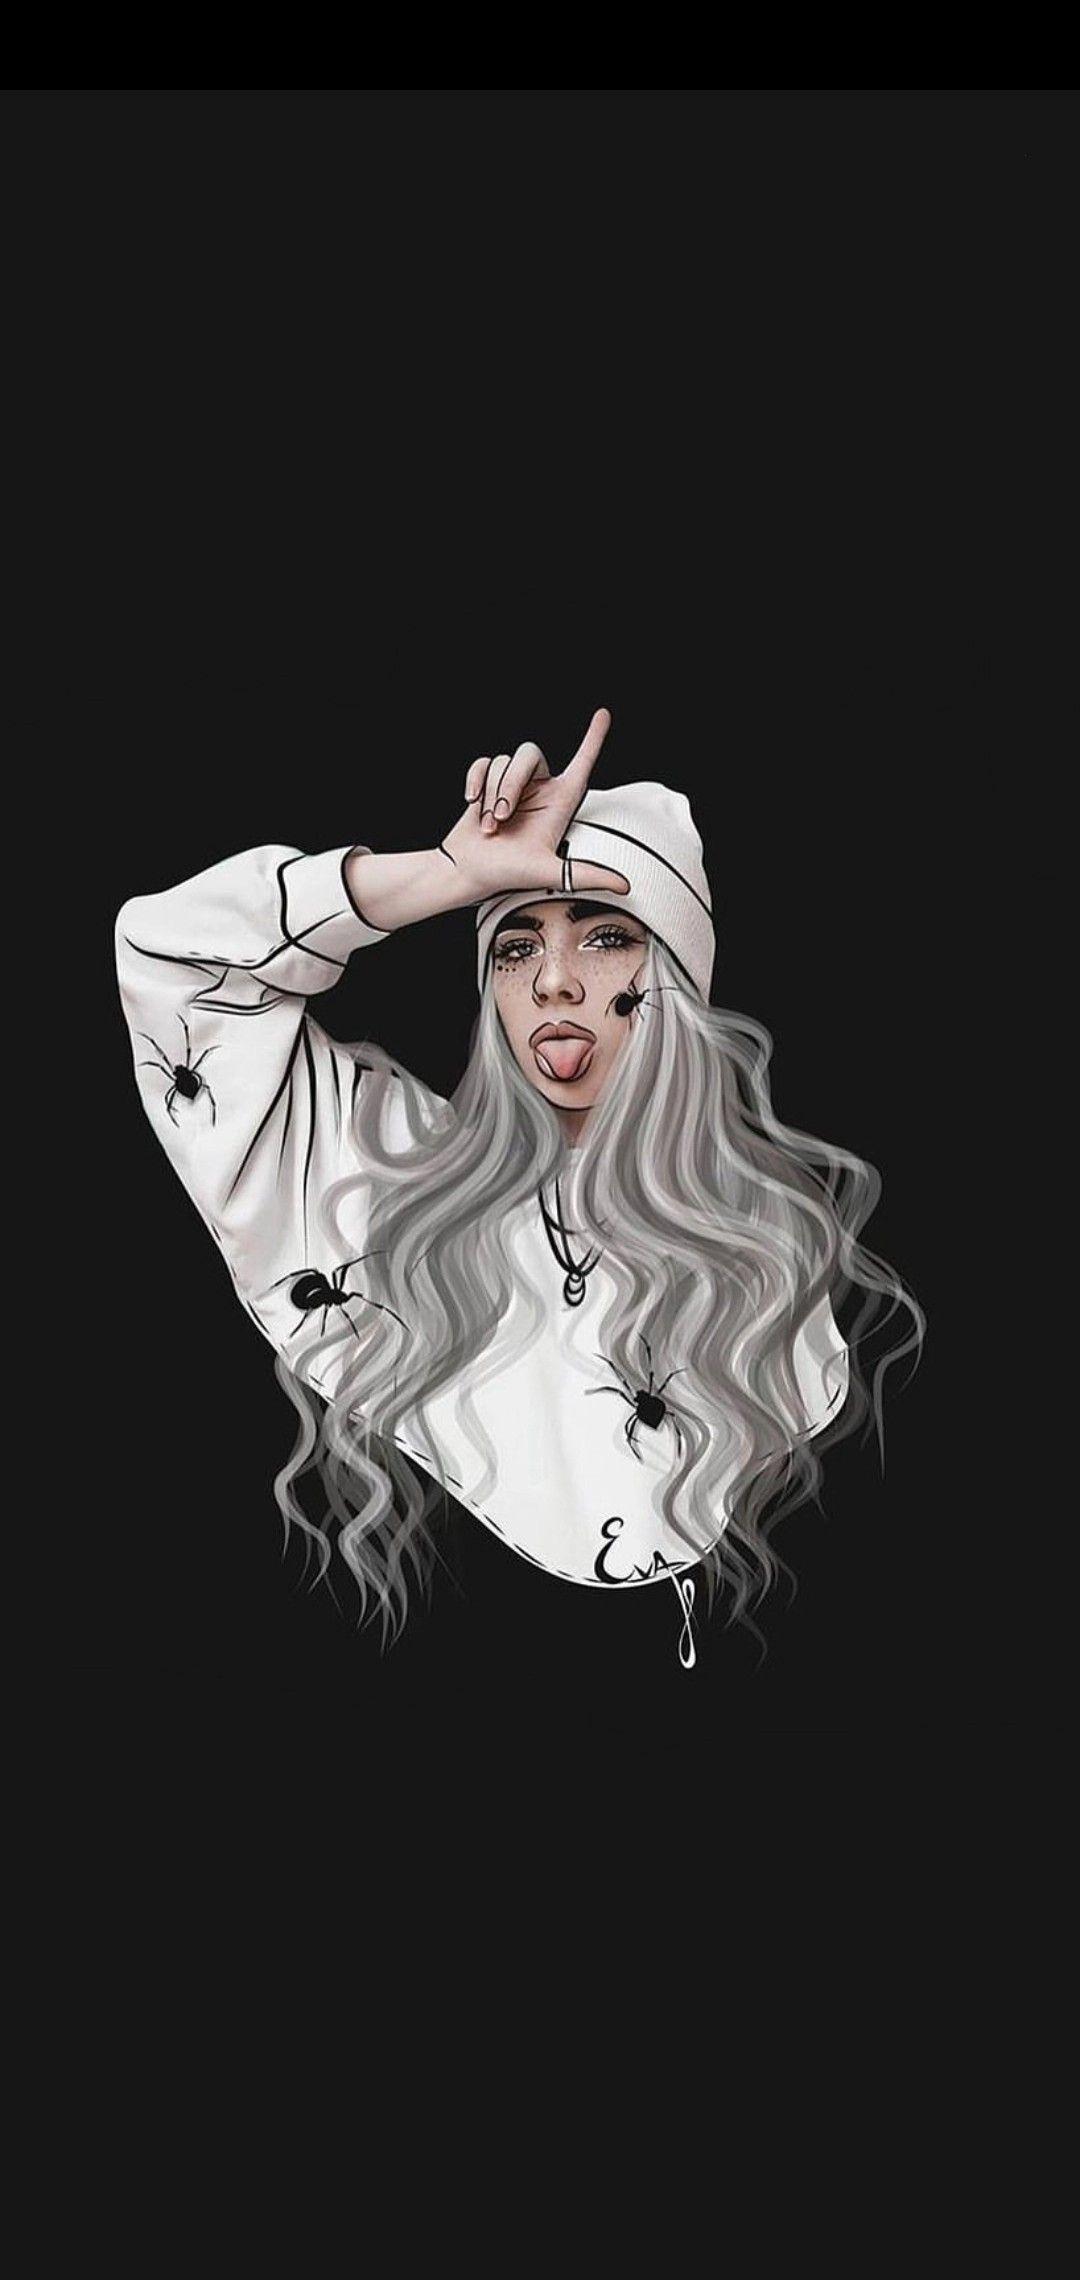 Aesthetic Billie Eilish Pictures Wallpapers